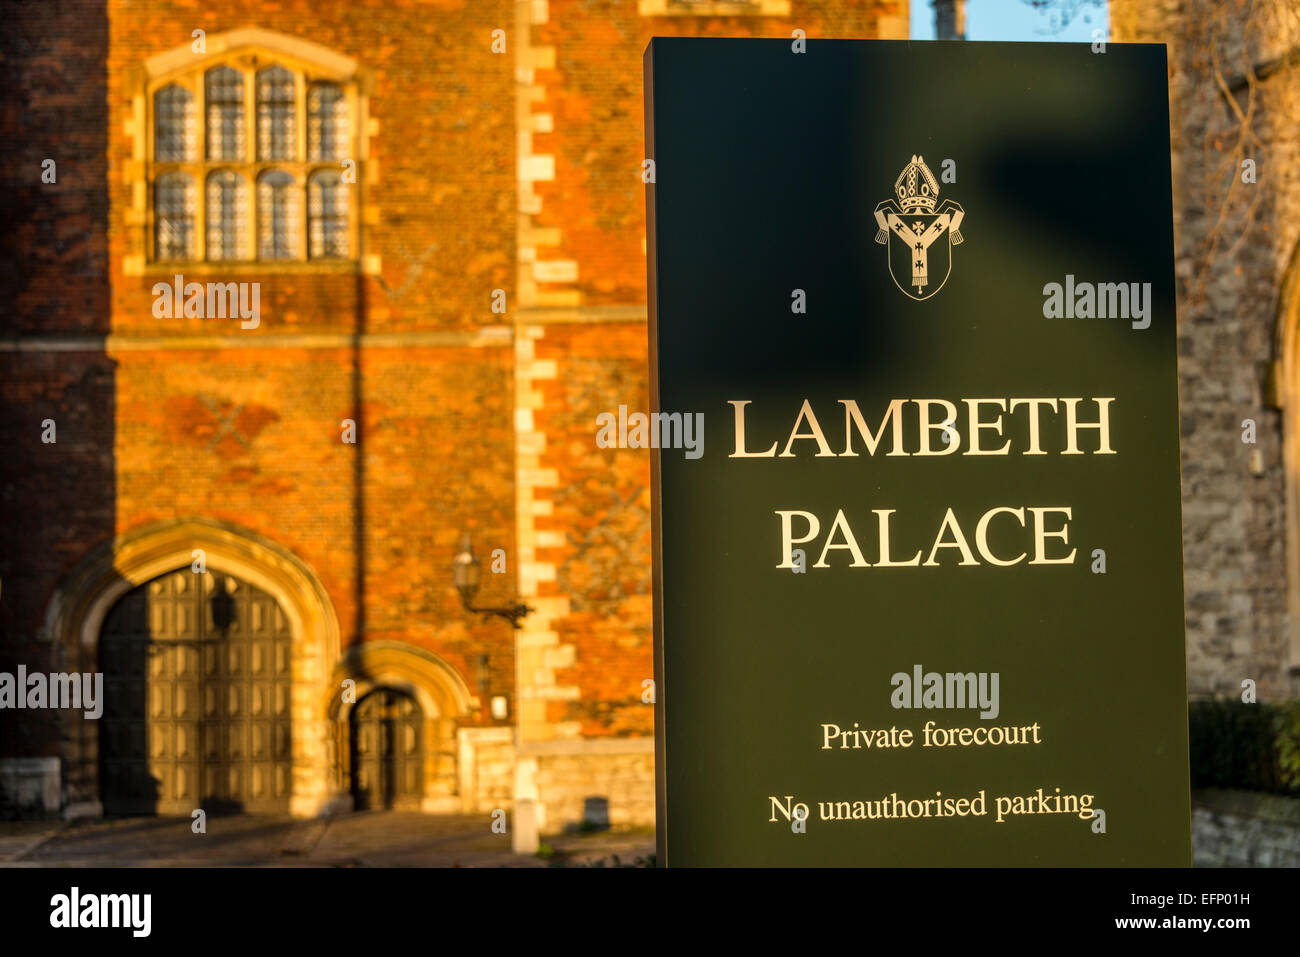 Lambeth Palace is the official London residence of the Archbishop of Canterbury in England, in North Lambeth. Stock Photo